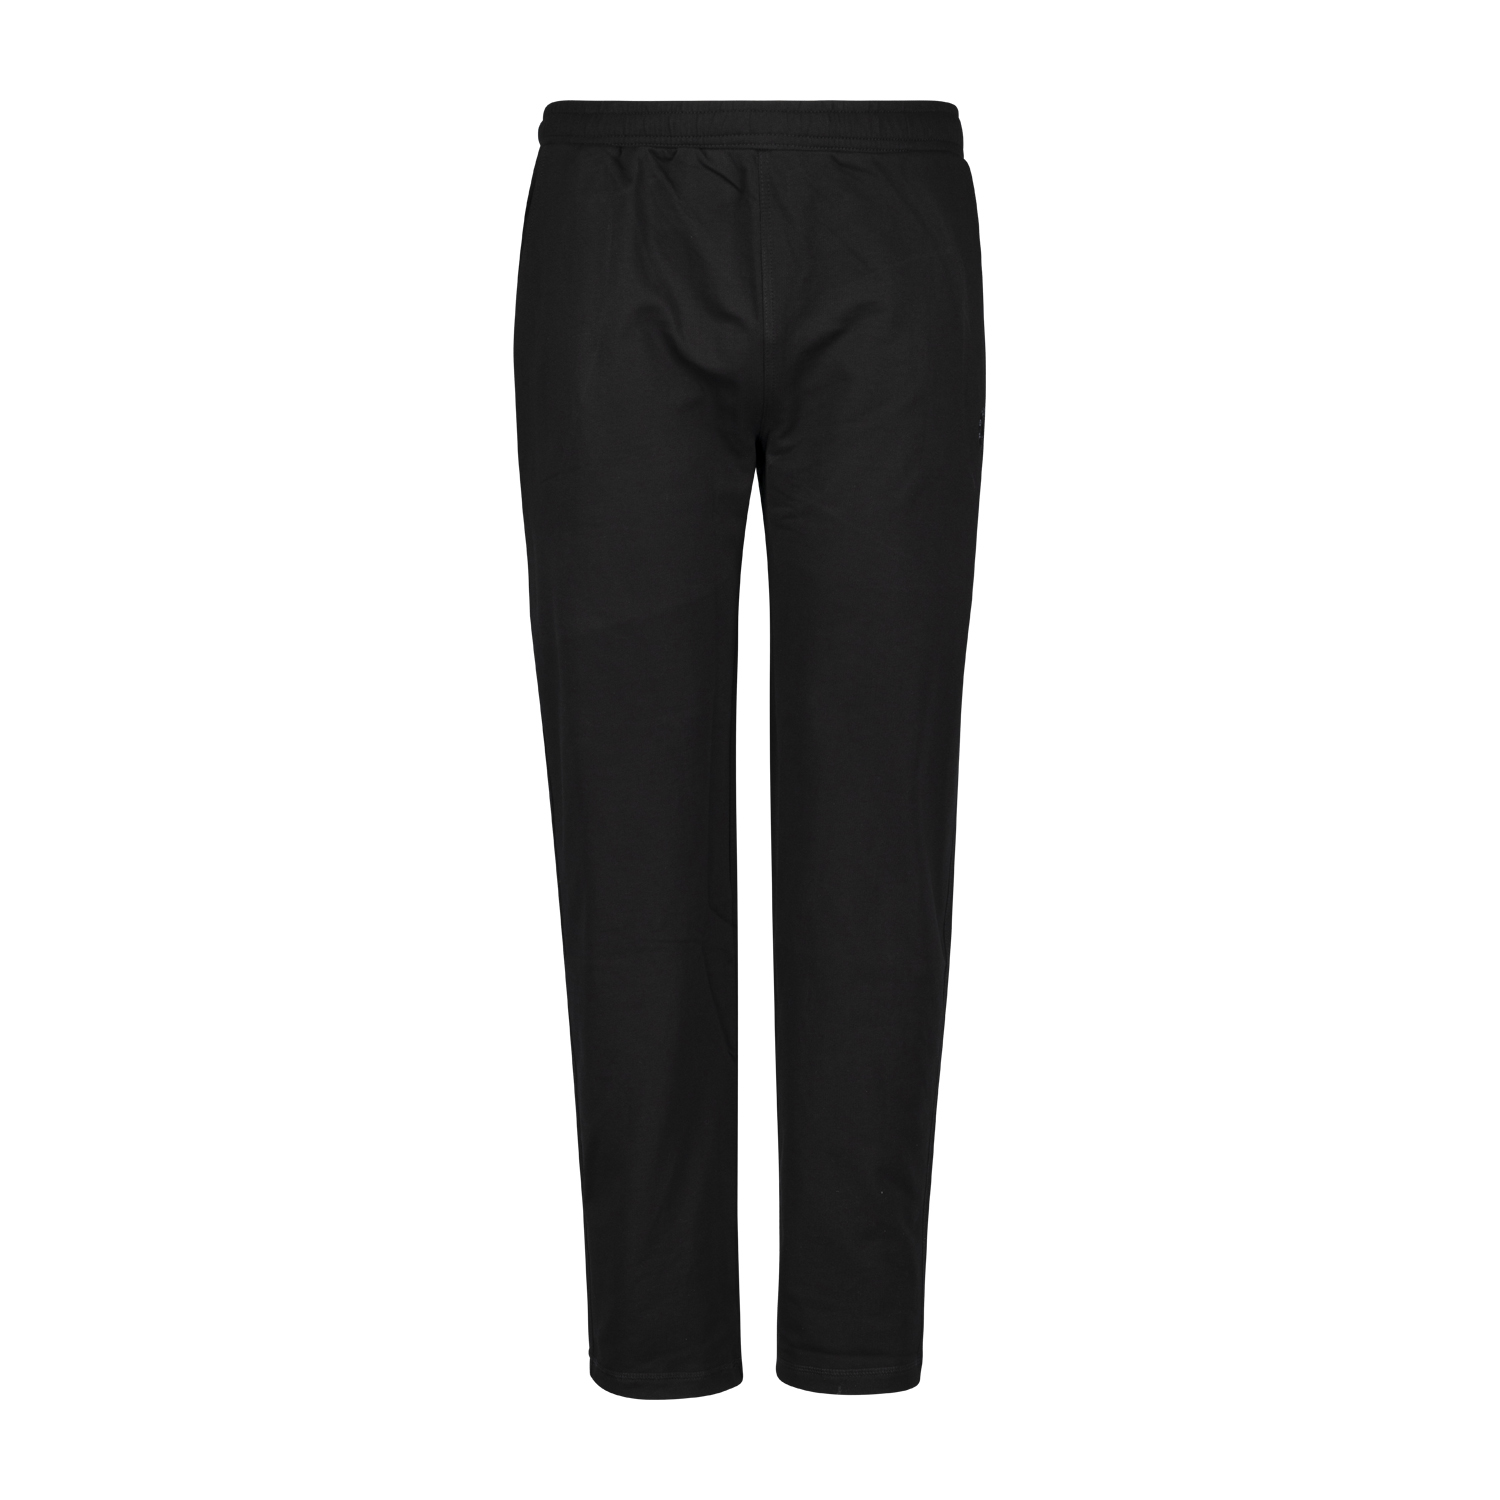 Jogging pants in black by Ahorn Sportswear up to oversize 10XL